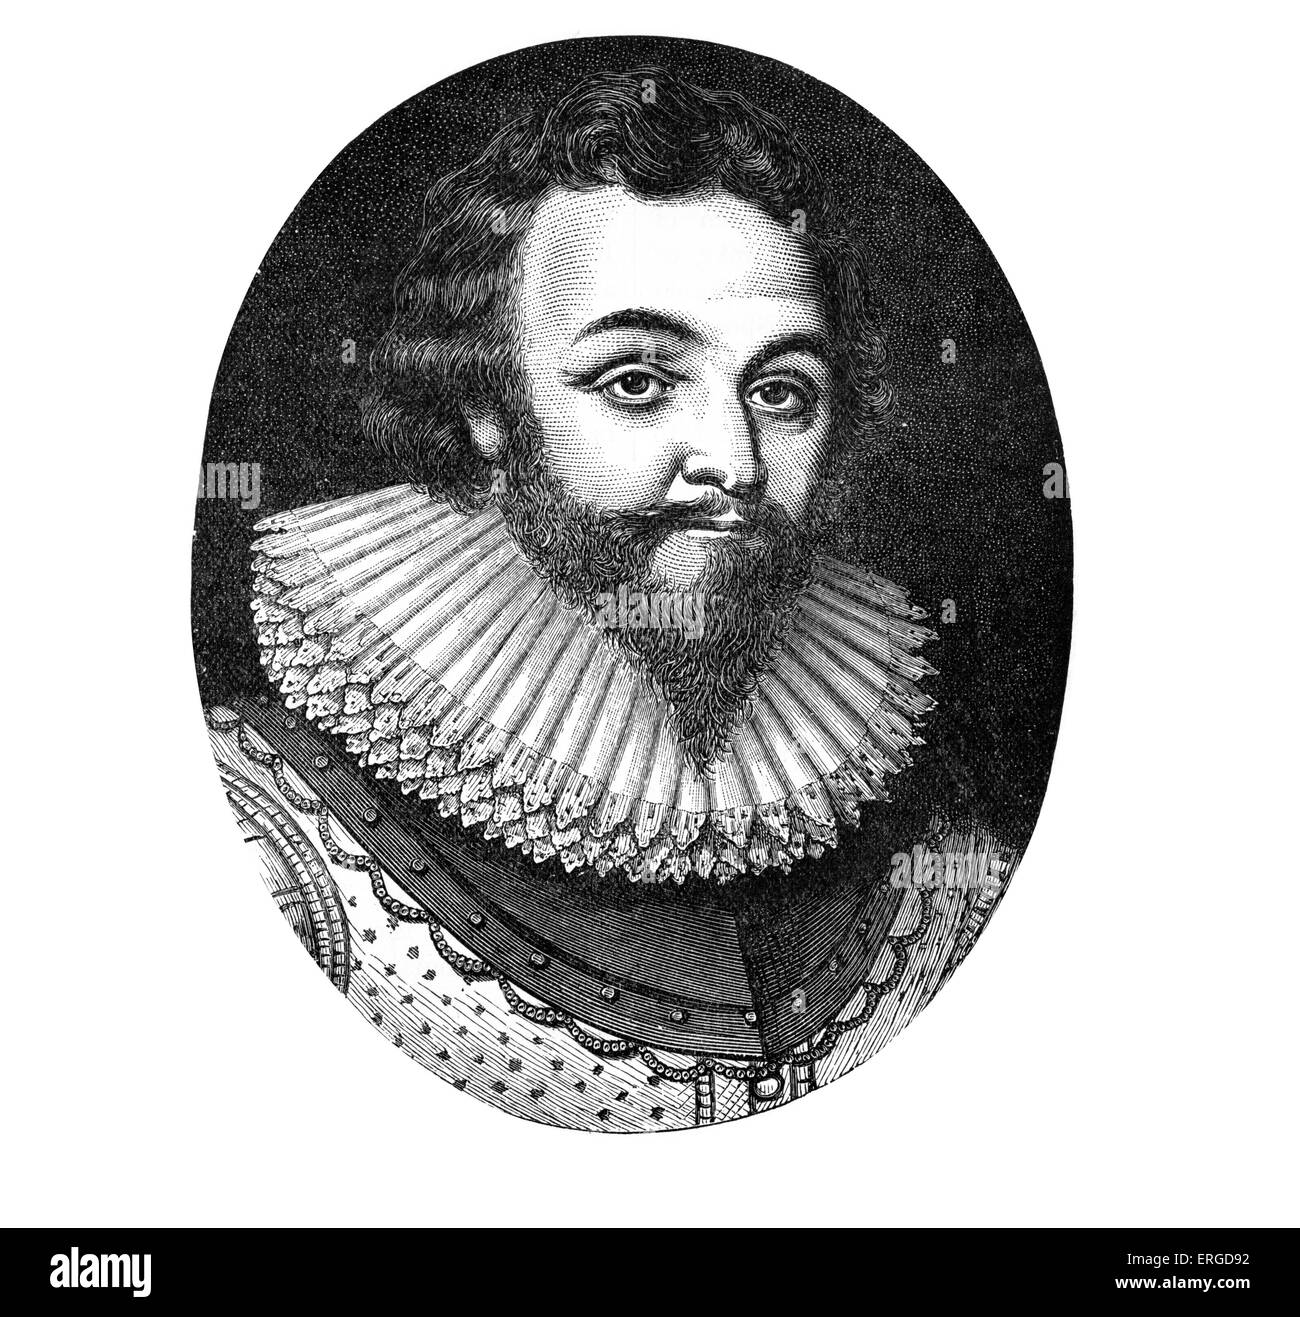 English admiral and privateer. Second person to circumnavigate the world: 1540 – 27 January 1596. Stock Photo